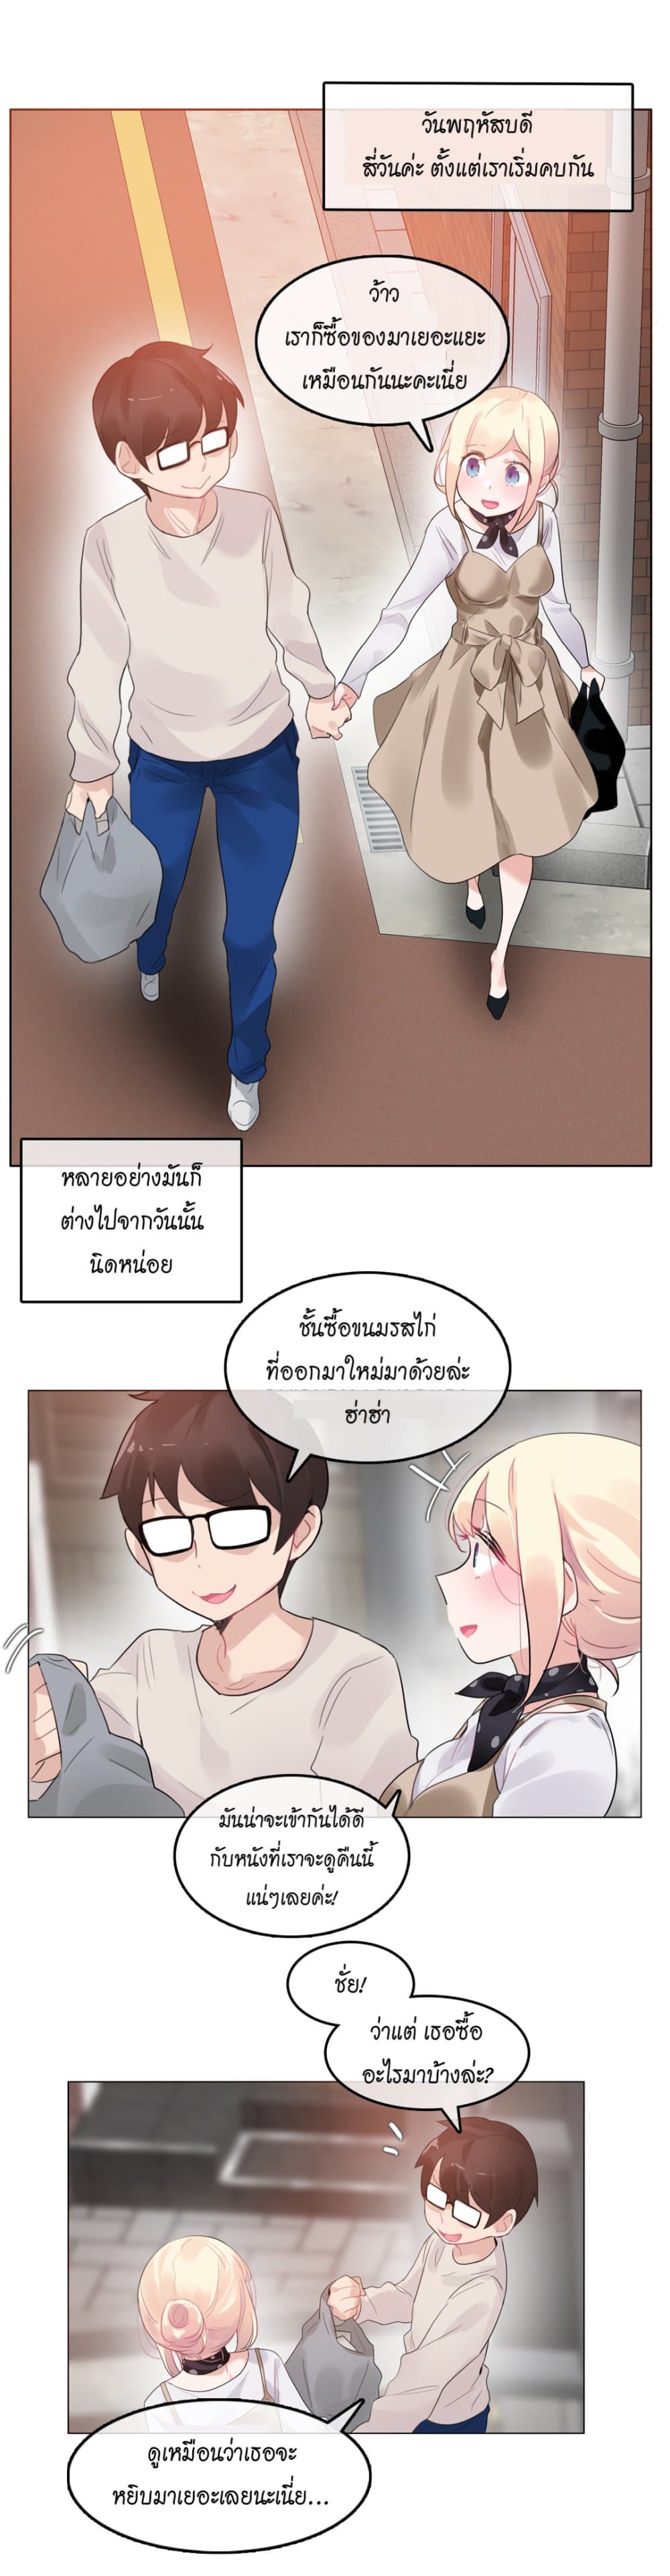 A Pervert's Daily Life 56-56